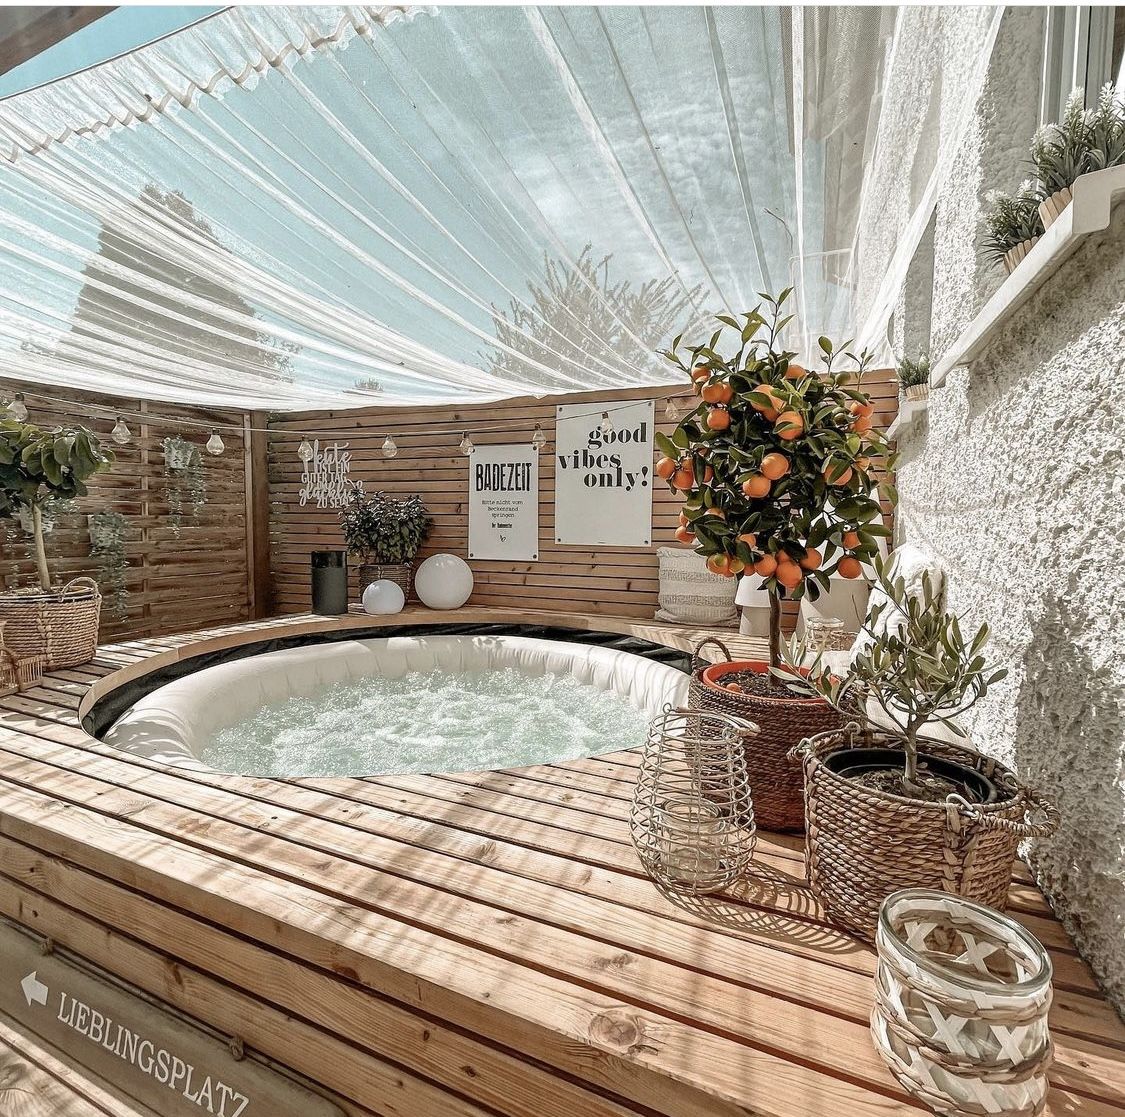 Creative Ways to Incorporate a Hot Tub into Your Small Garden